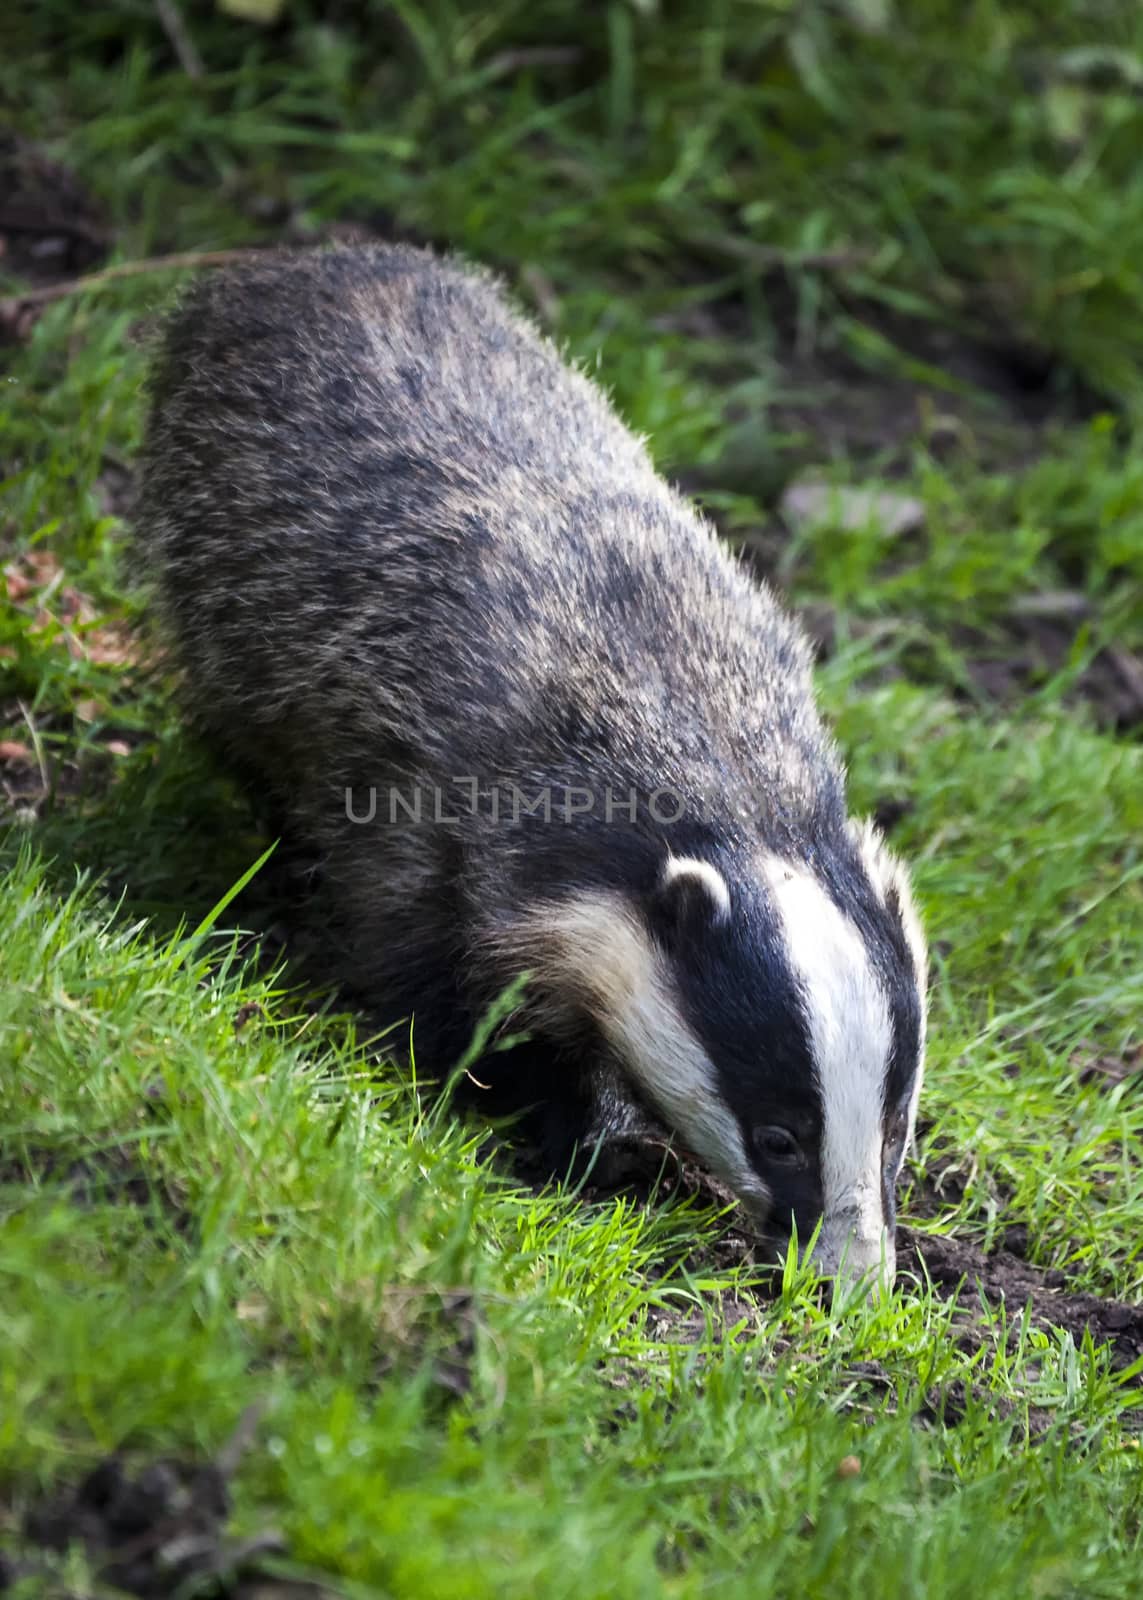 Badger which is a black and white wild animal feeding in woodland forests